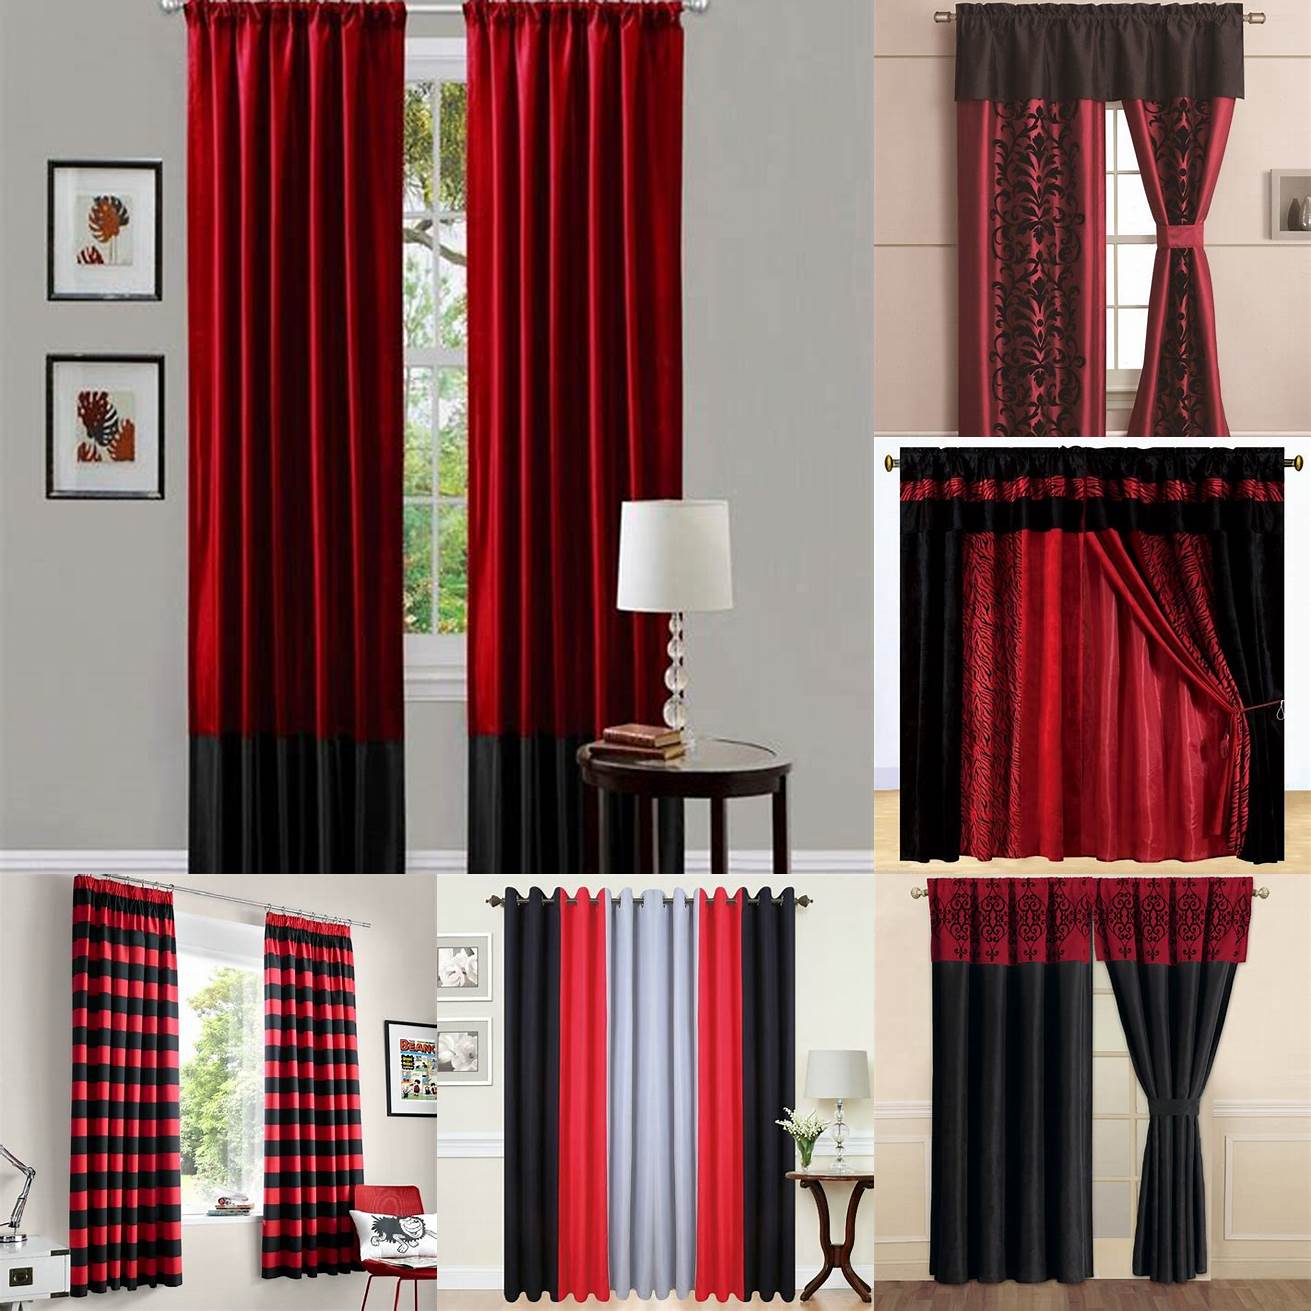 Red and black curtains in a bedroom